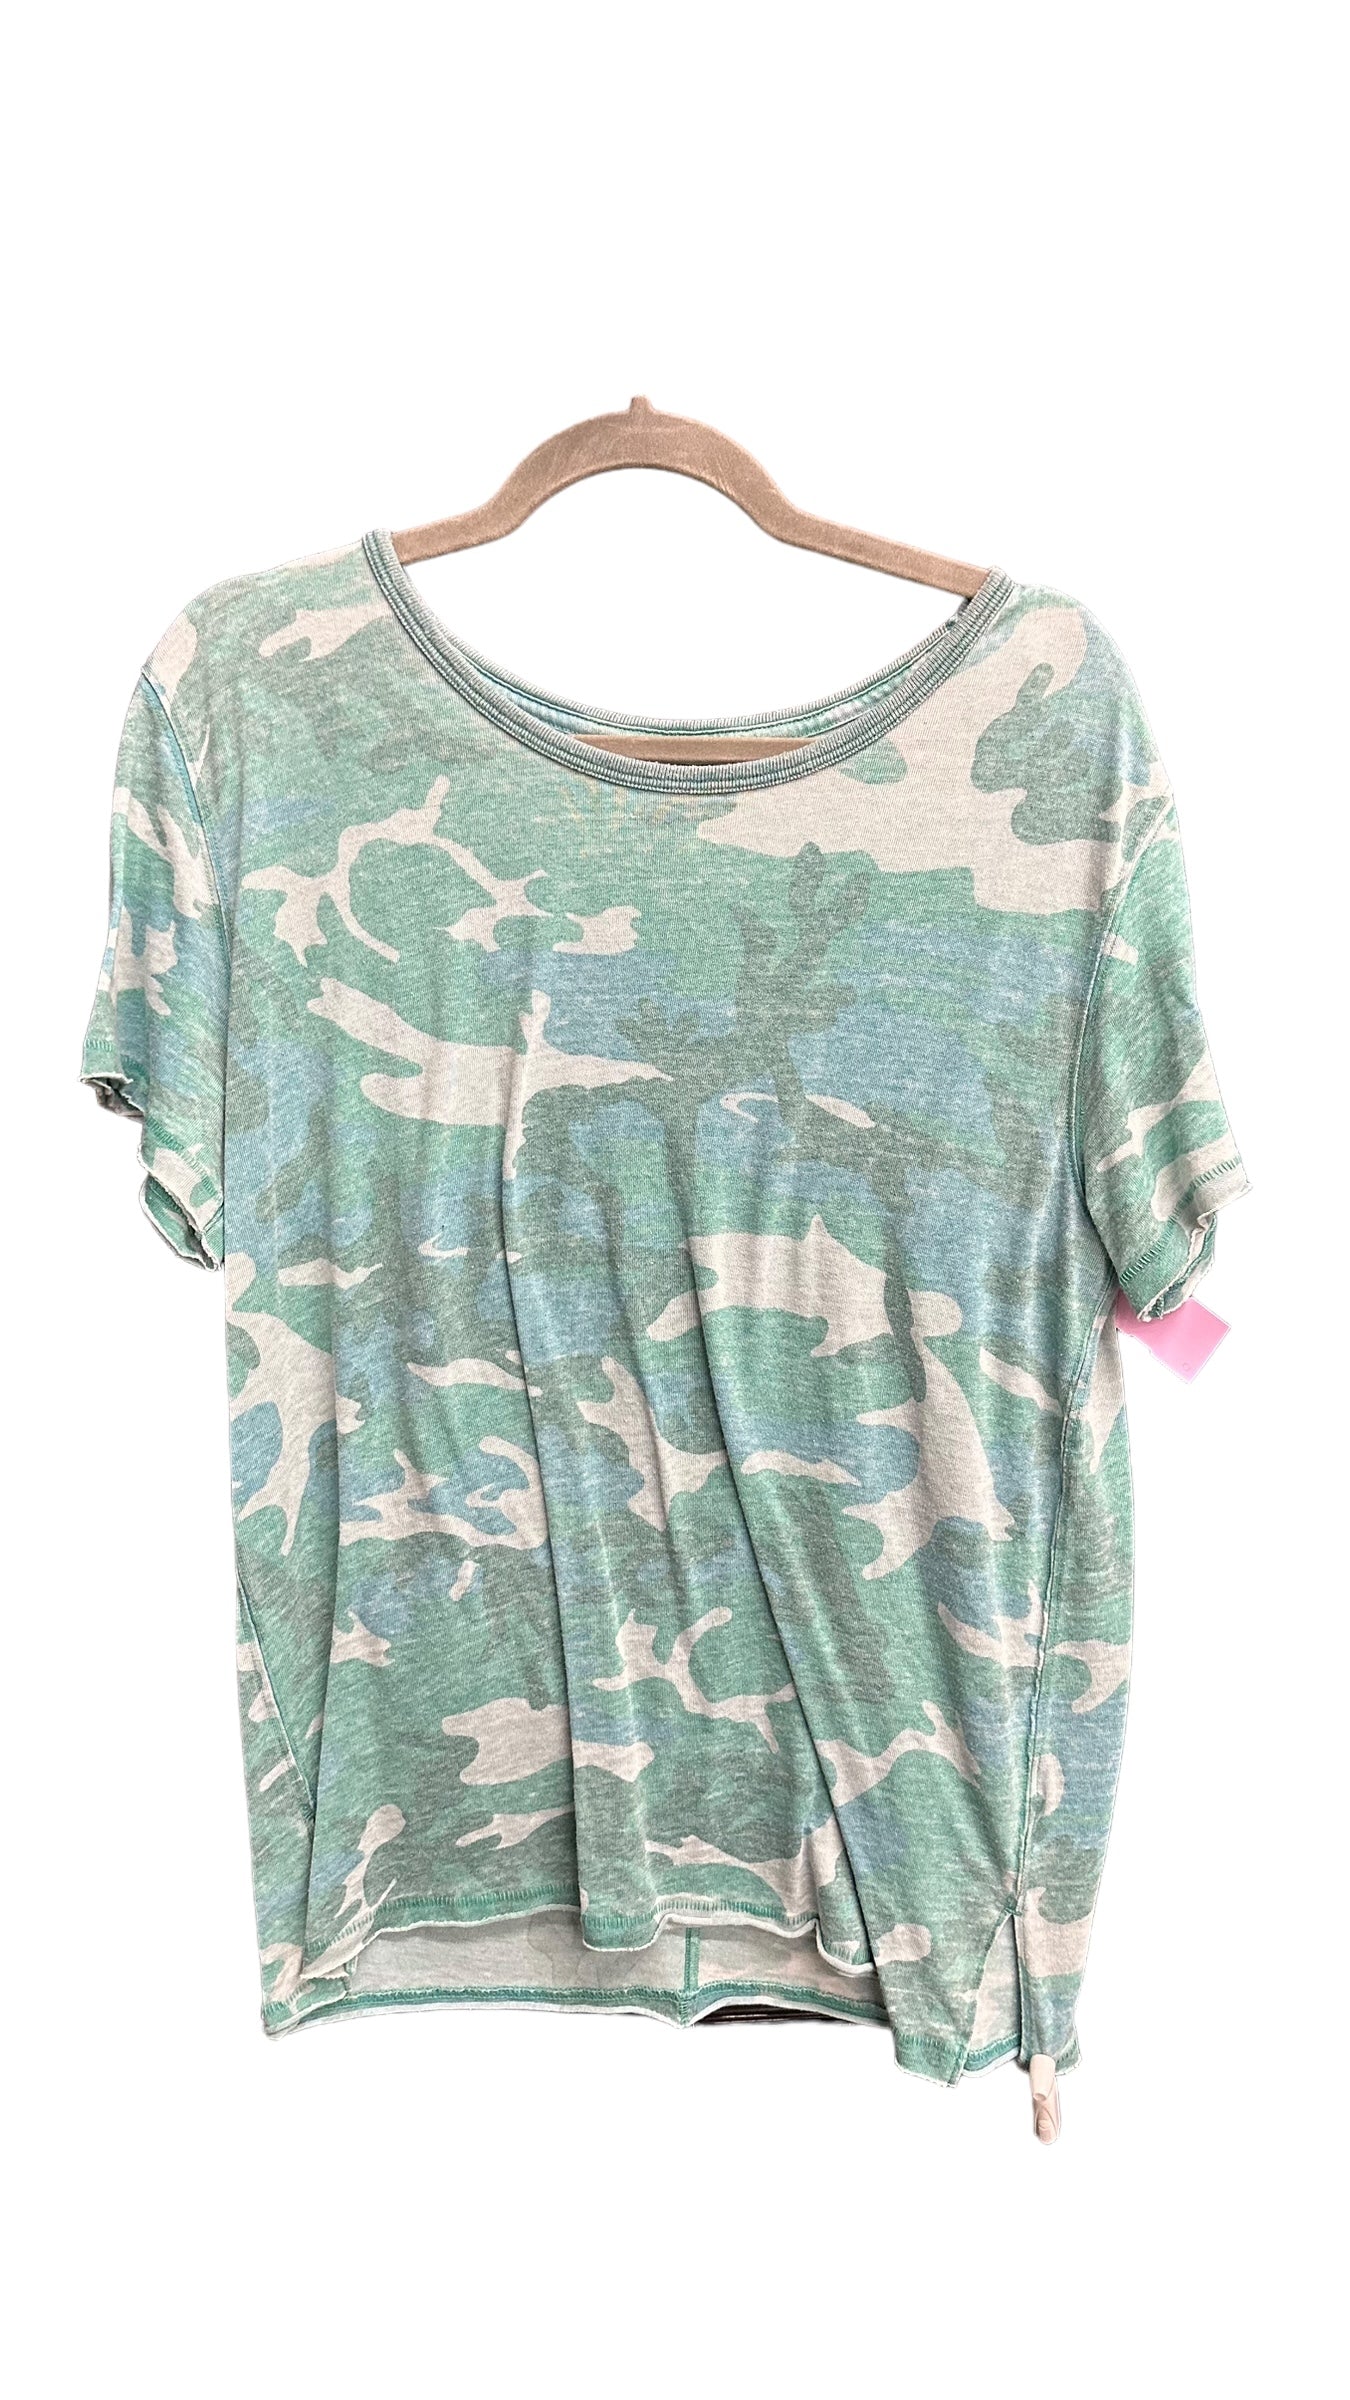 Camouflage Print Top Short Sleeve Free People, Size M